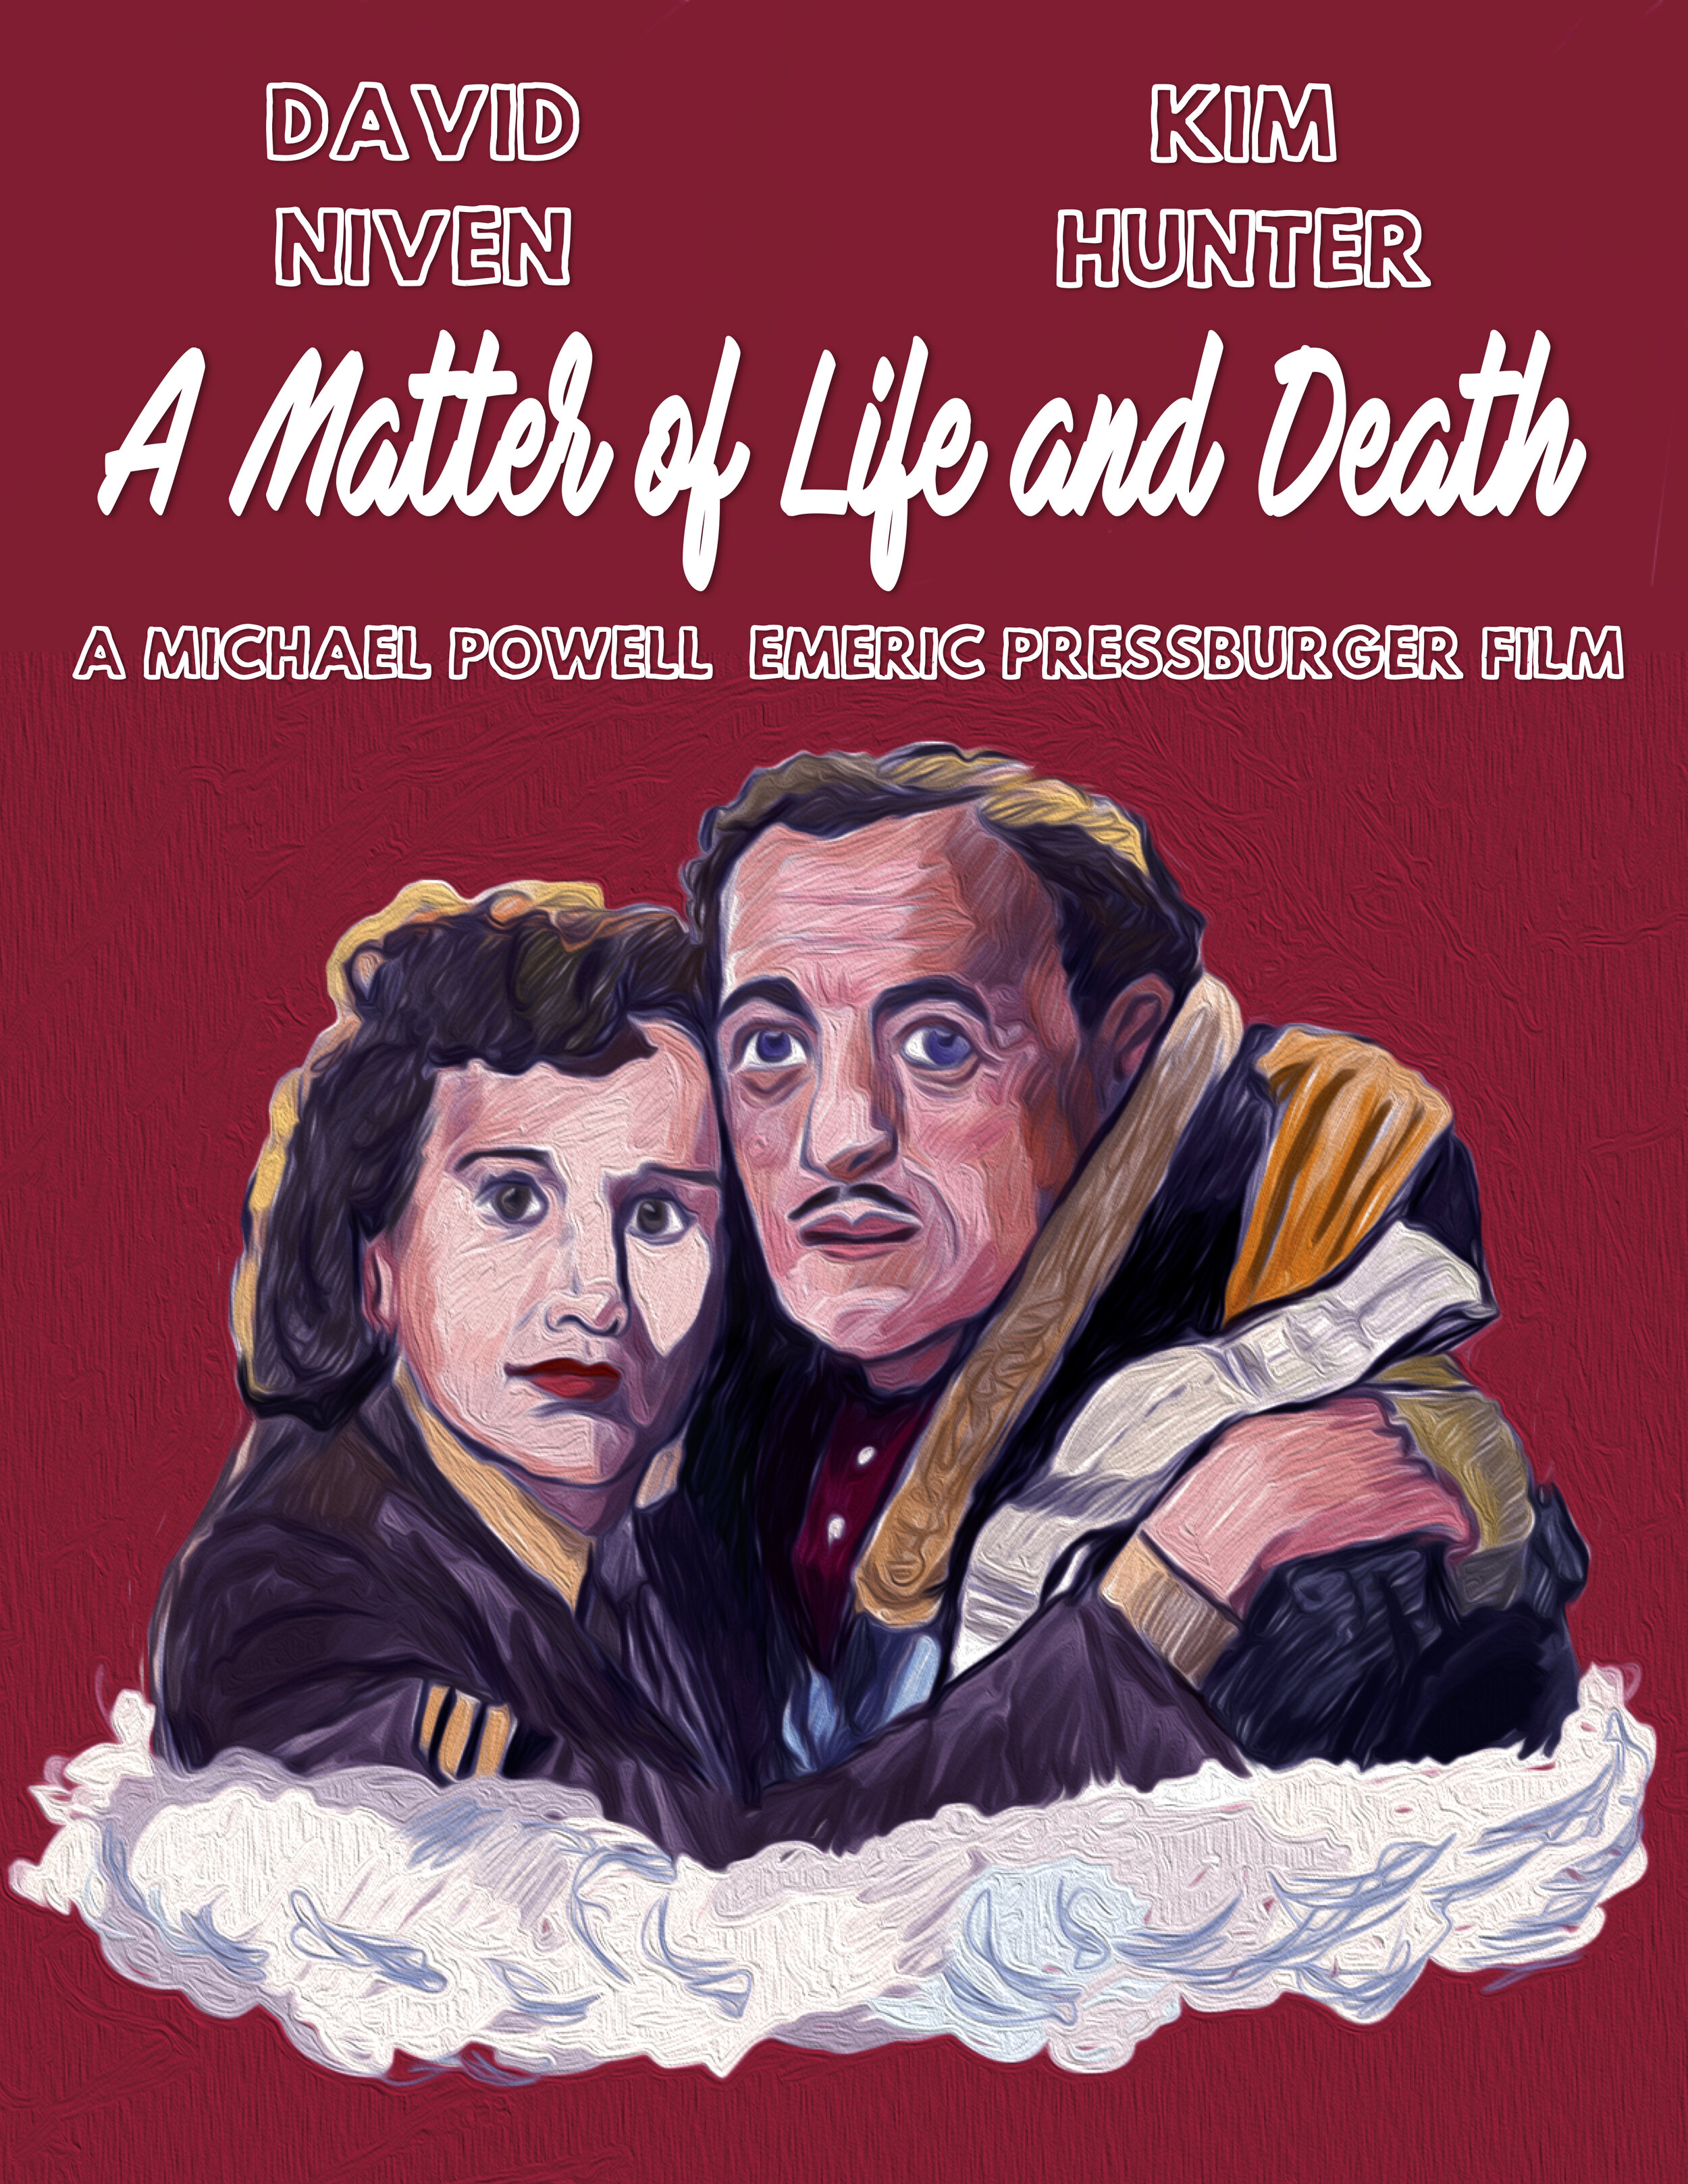 A Matter of Life and Death (1946)